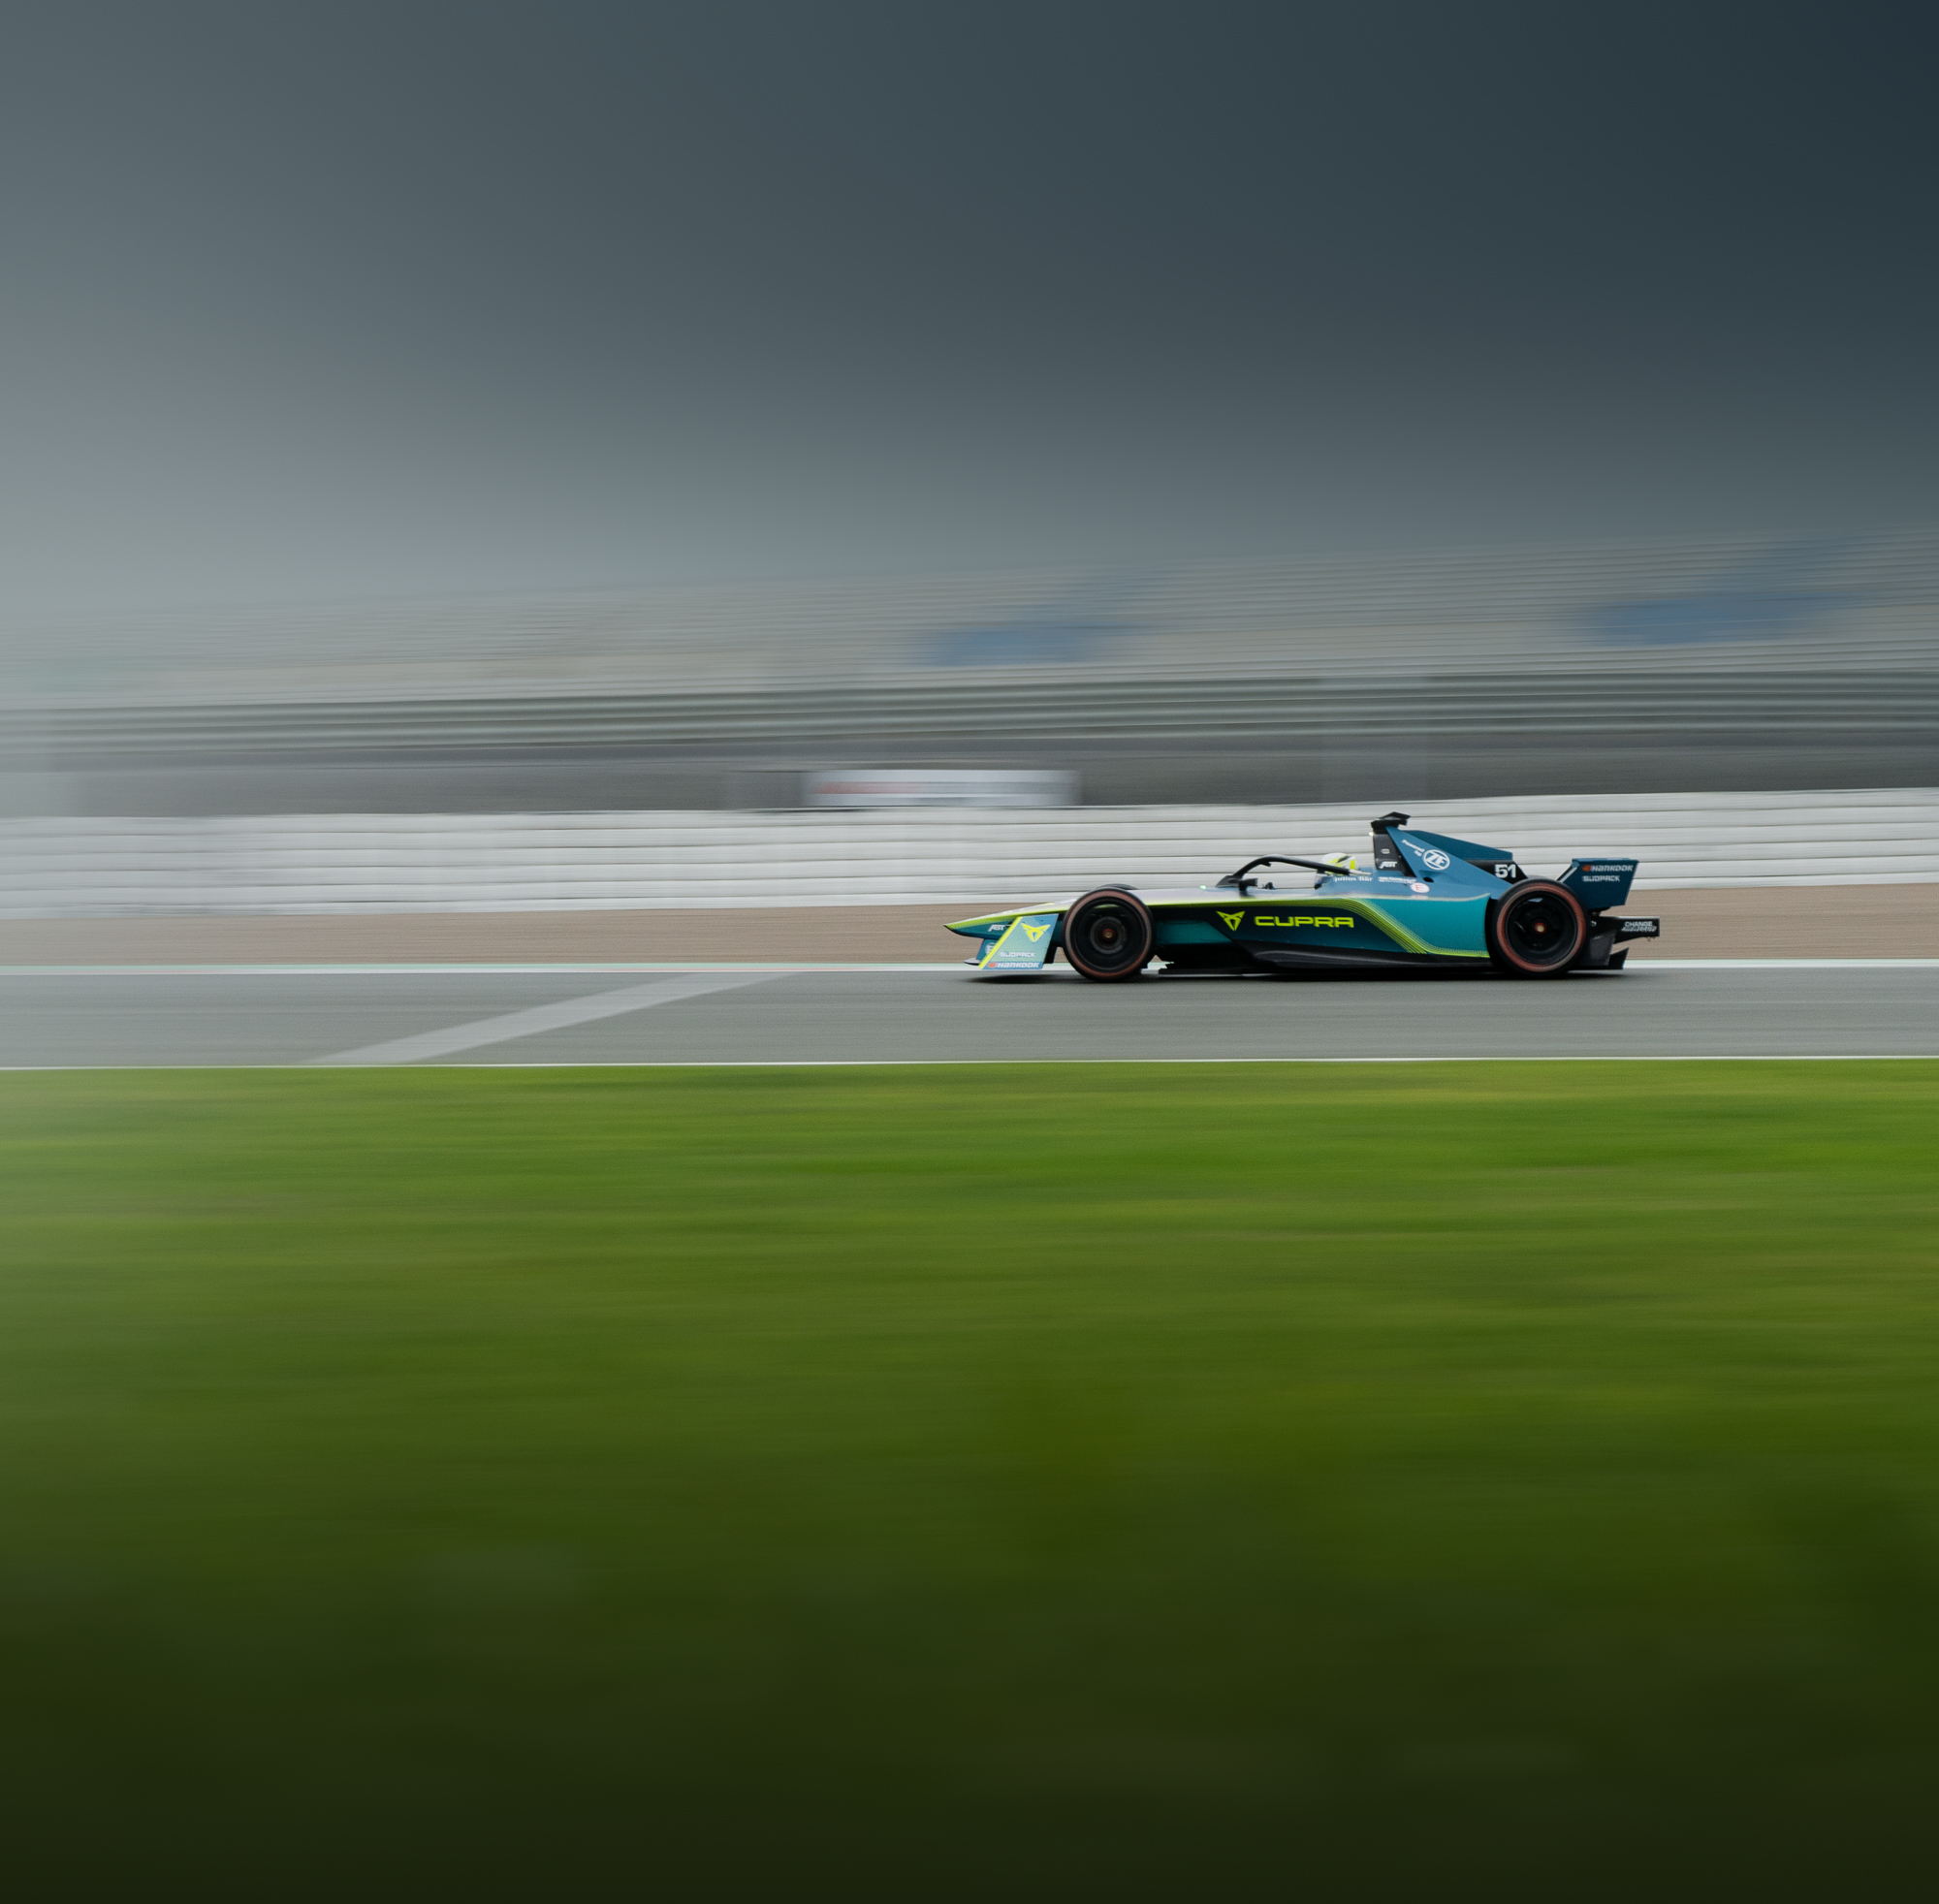 The ABT CUPRA FE team hits the tracks for the first time with the new Gen3 Formula E car at Valencia